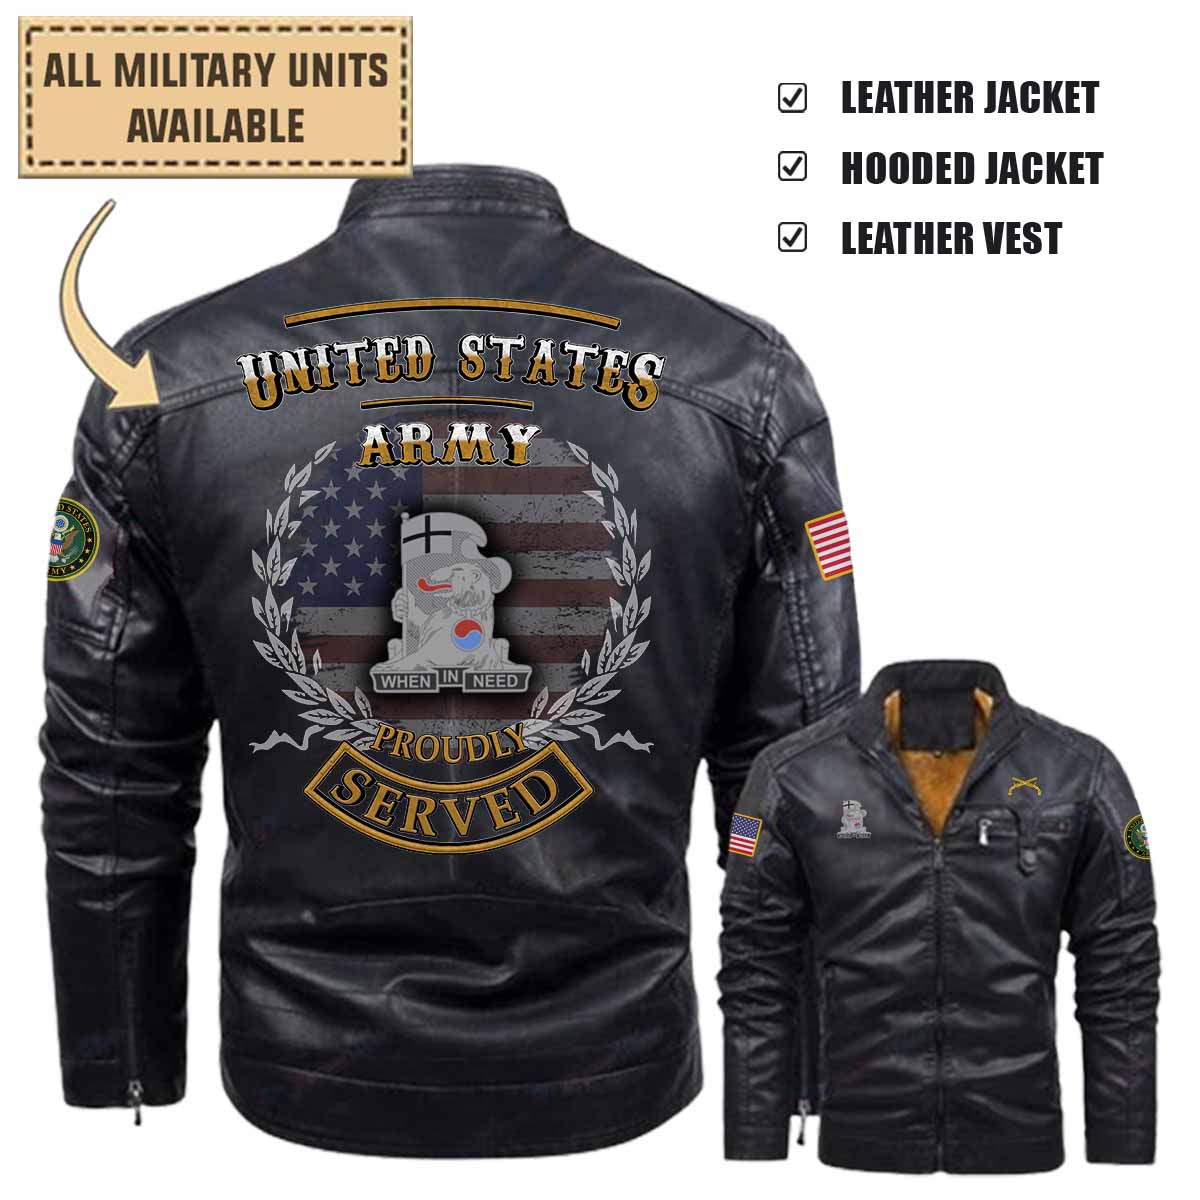 94th MP BN 94th Military Police Battalion_Military Leather Jacket and Vest